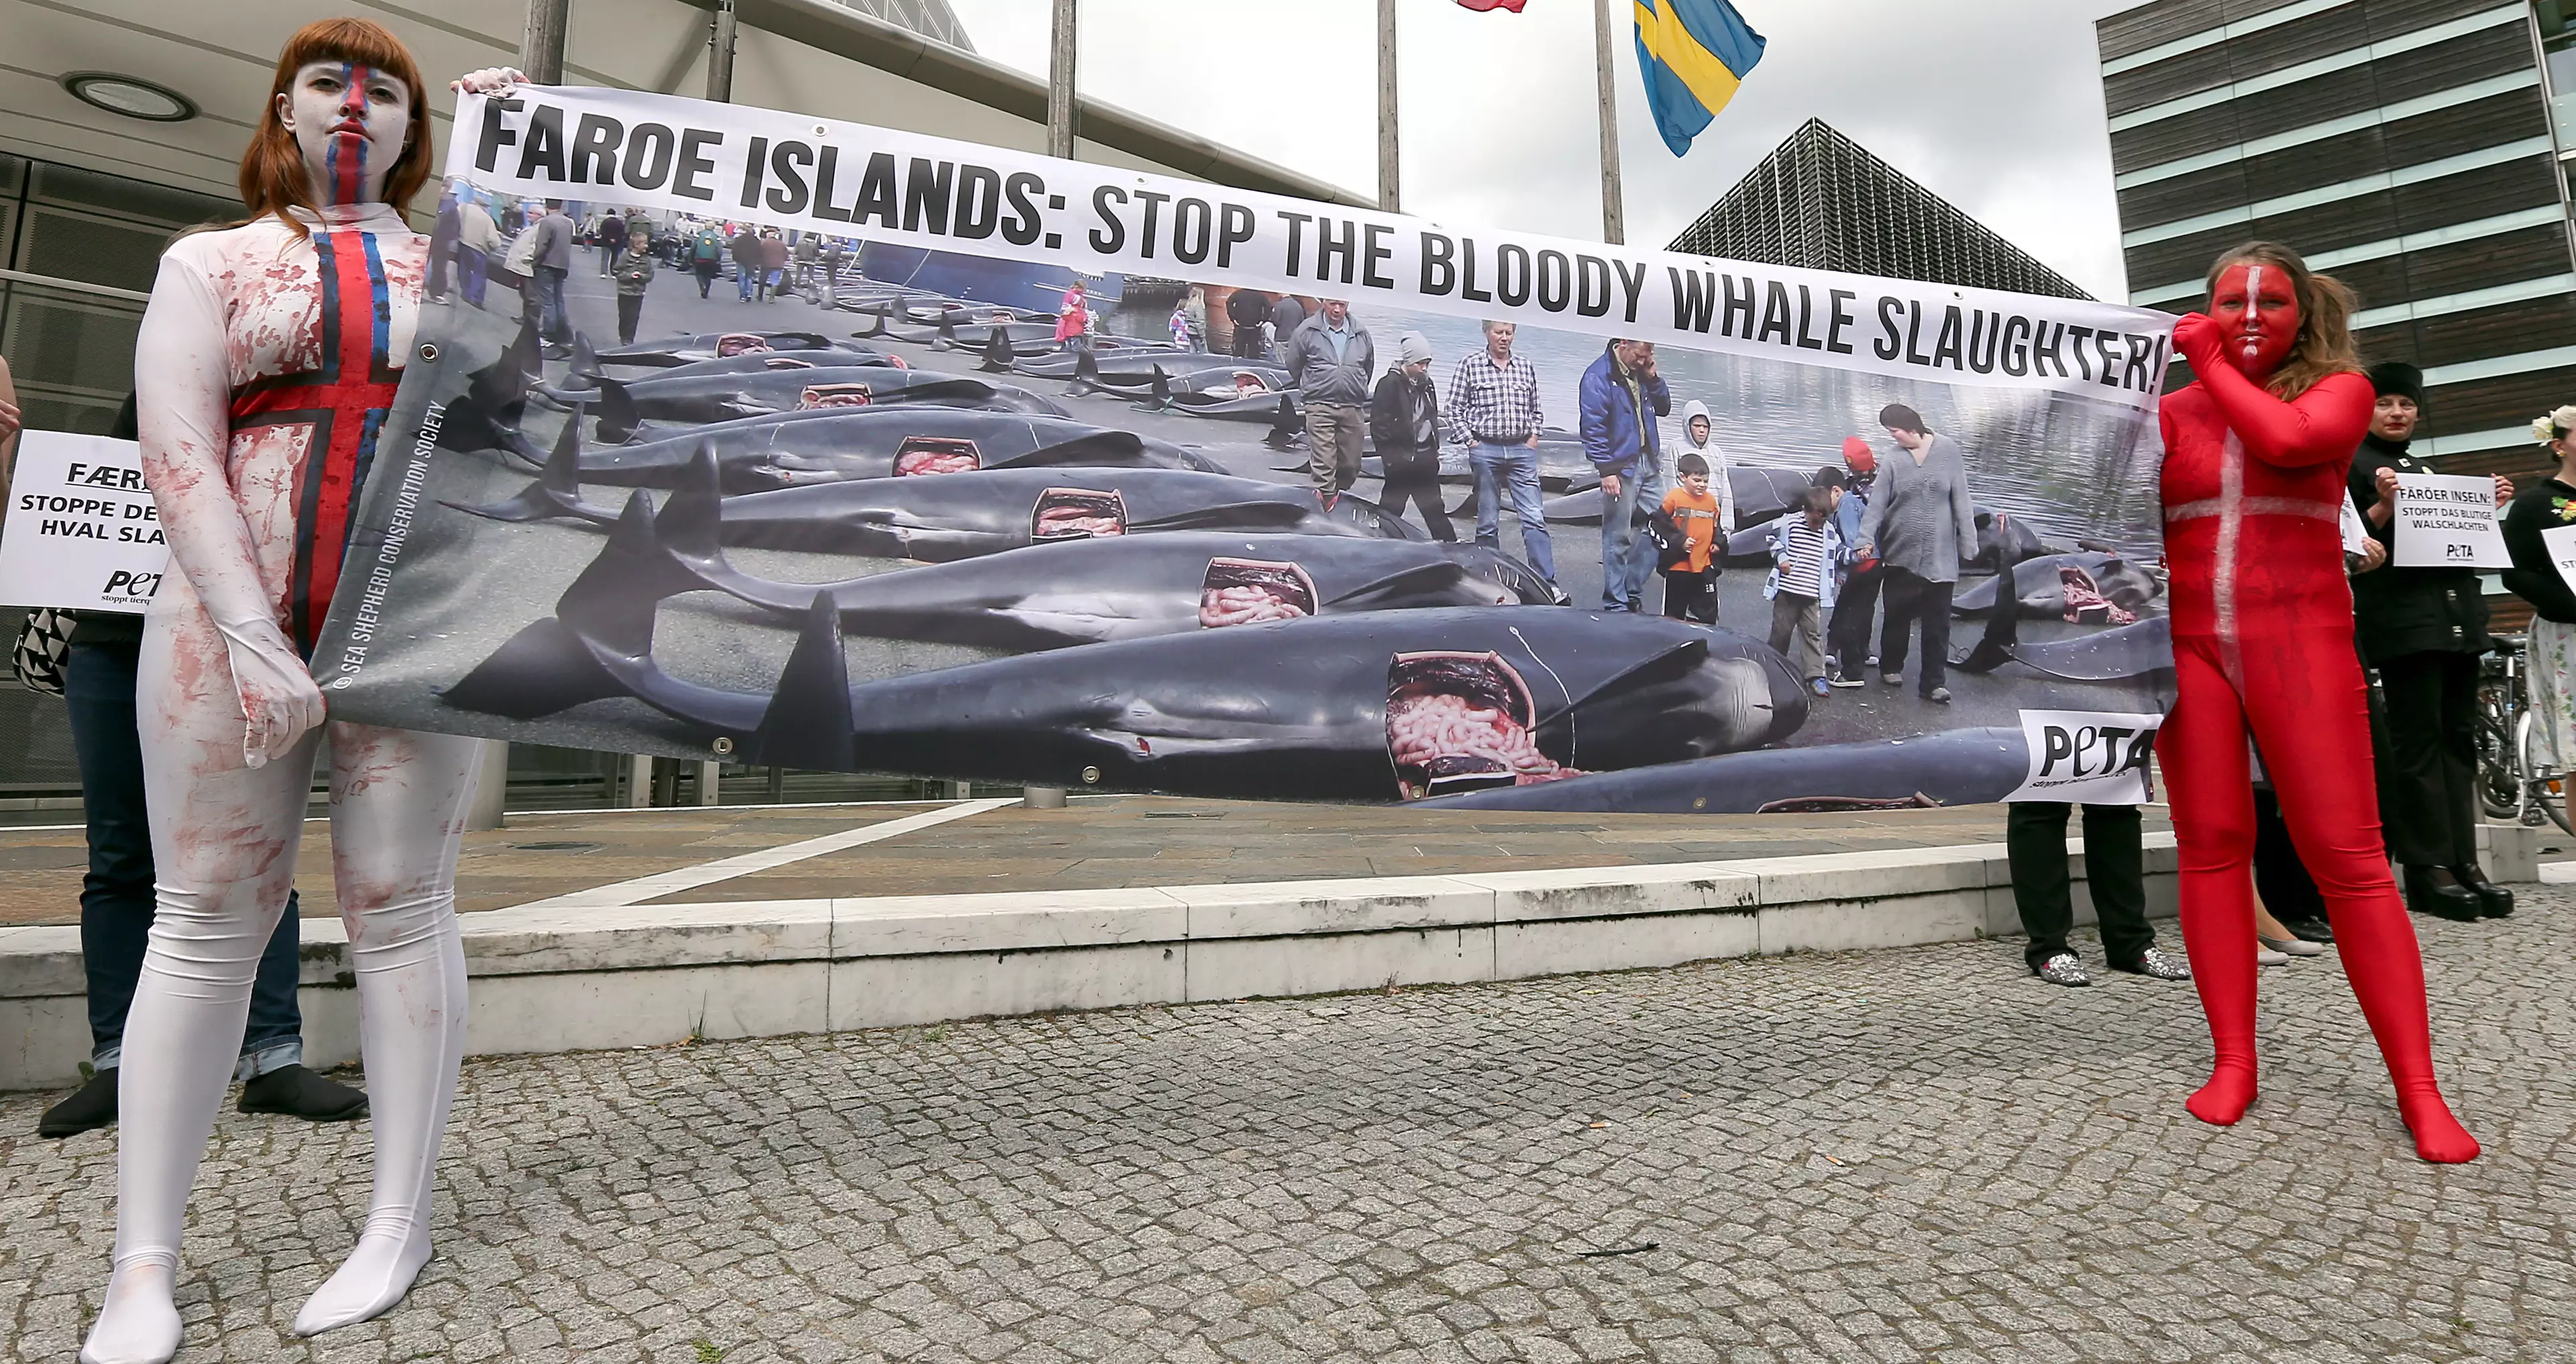 PETA protesting against whaling back in 2014 (